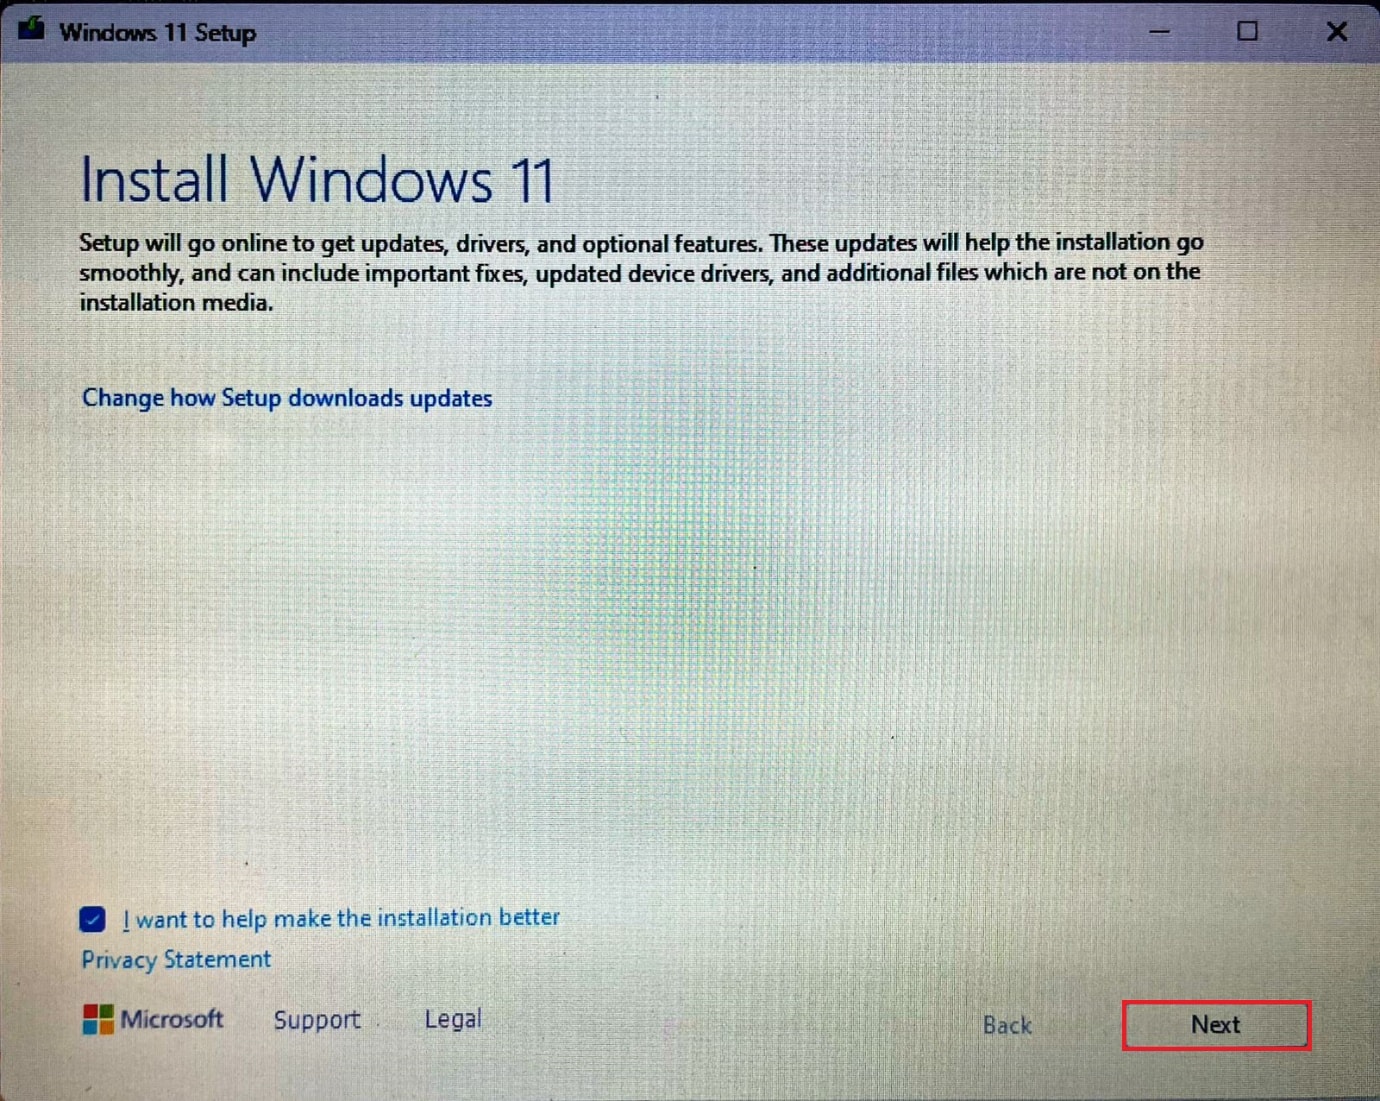 Tap Next to start with the process of Clean Installation. Clean Install Windows 11 without USB